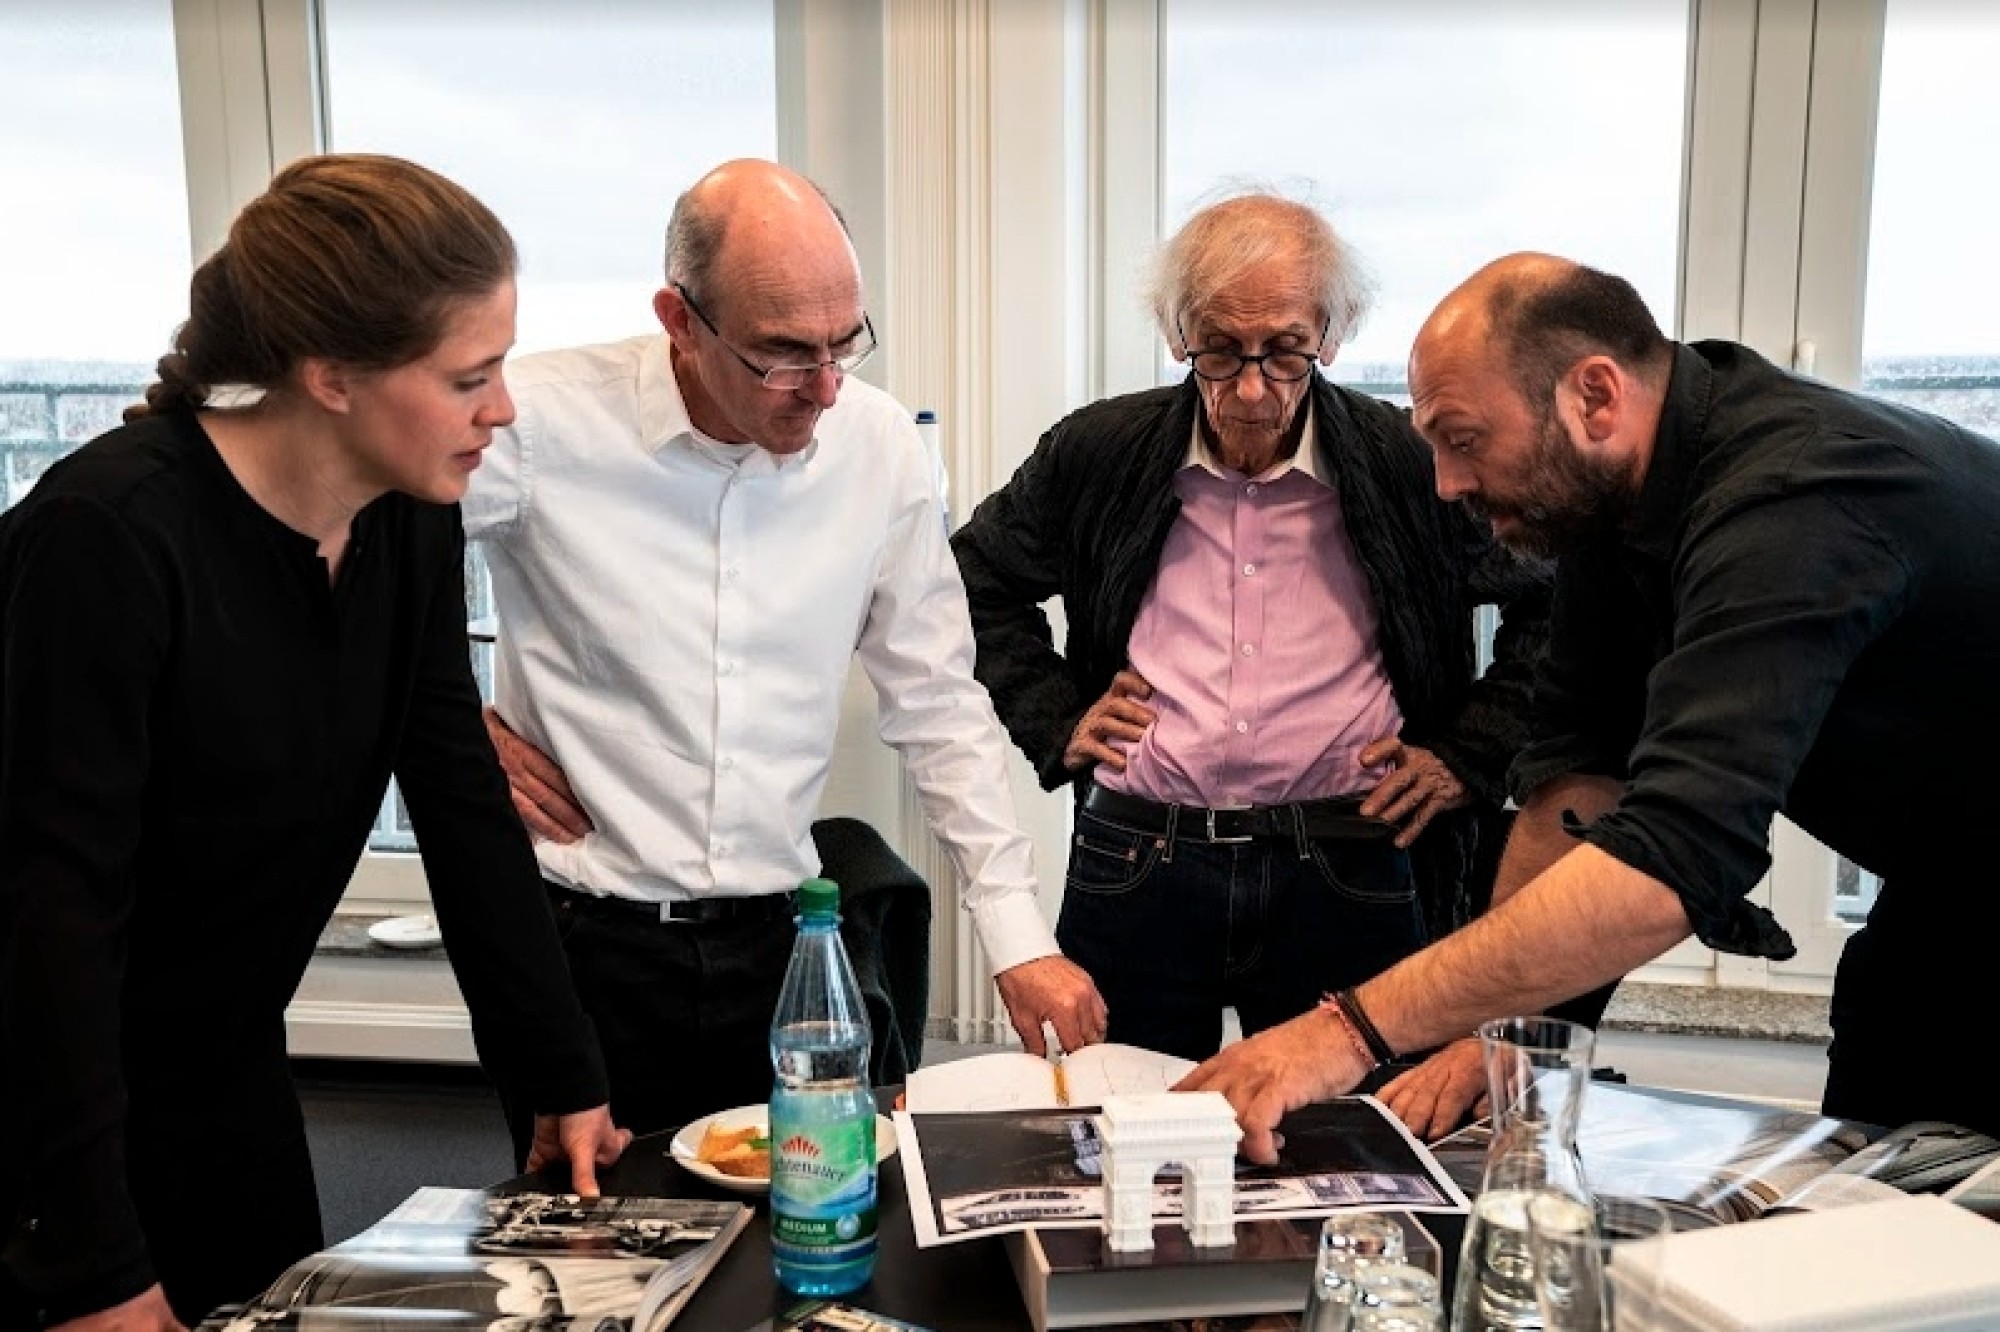 Christo, Prof. Schlaich, and their teams review engineering plans for the substructure of “L’Arc de Triomphe, Wrapped” at the headquarters of Schlaich Bergermann Partner Wolfgang Volz © 2019 Christo and Jeanne-Claude Foundation title=